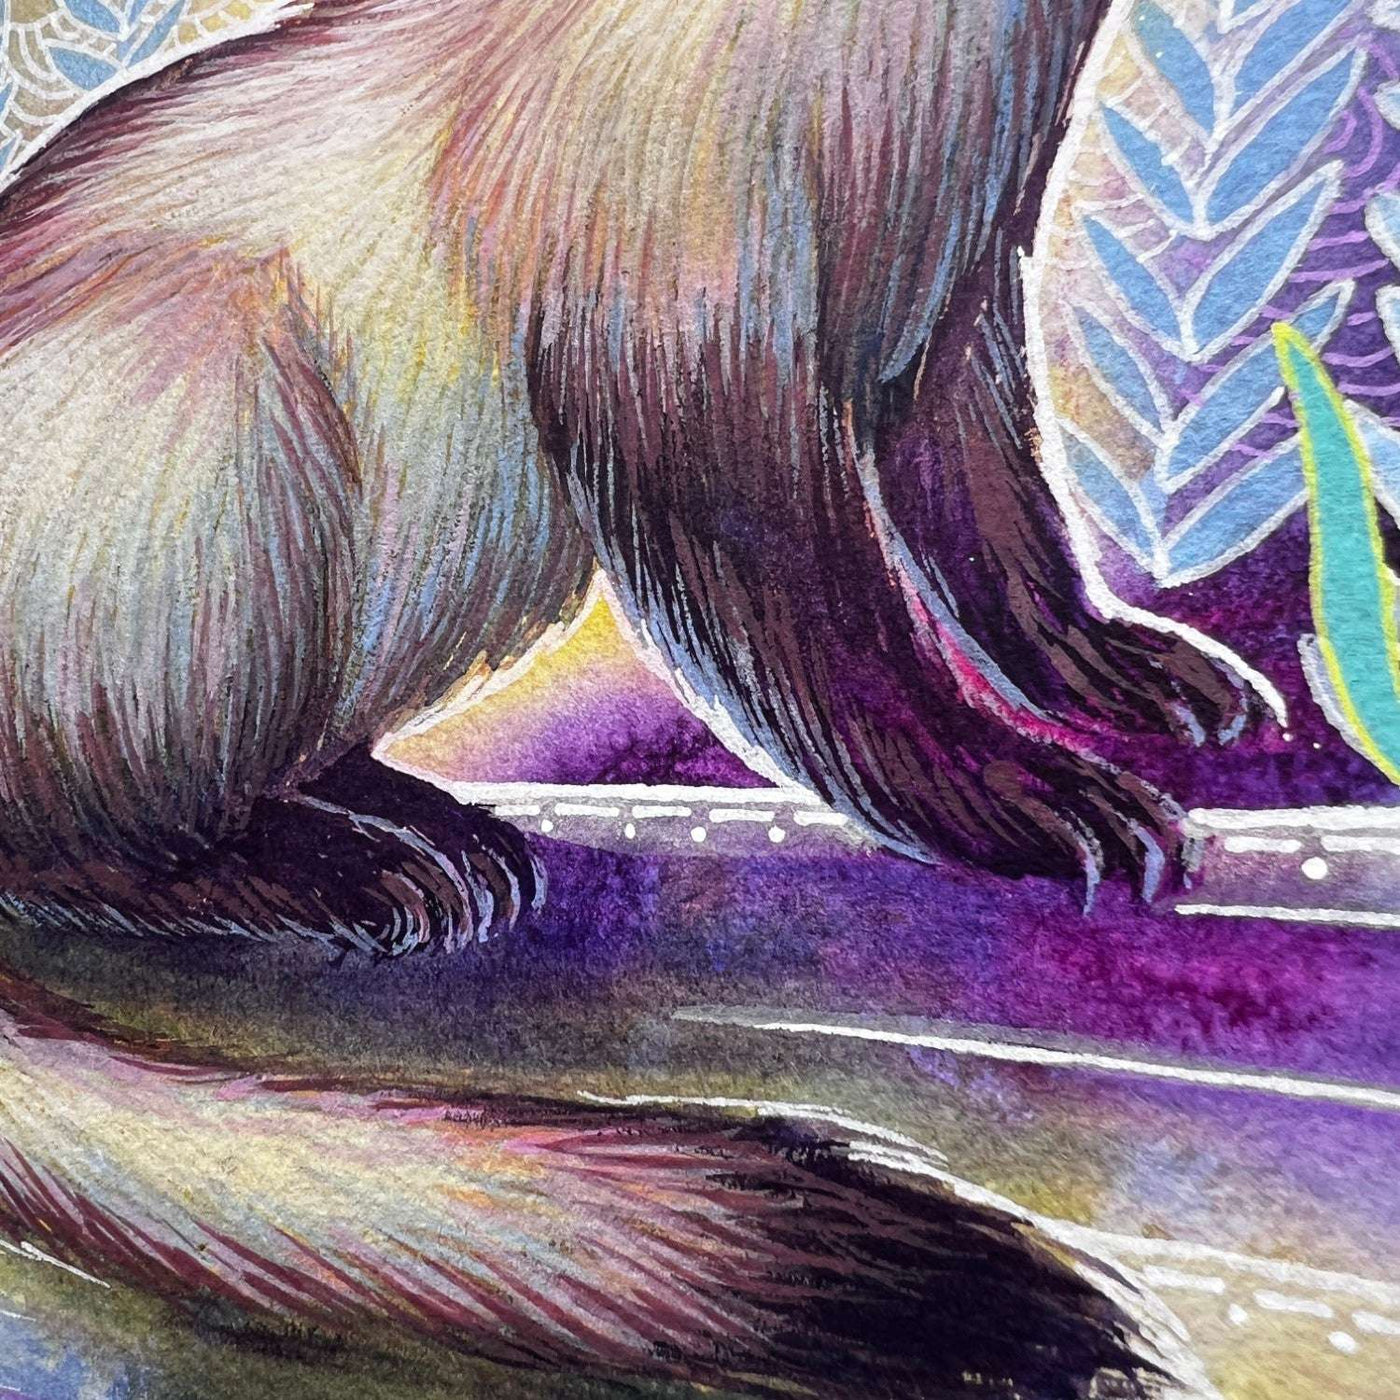 Close-up of "The Ferret - Original Artwork" depicting the fur detail of a ferret with vibrant purple and green background foliage.